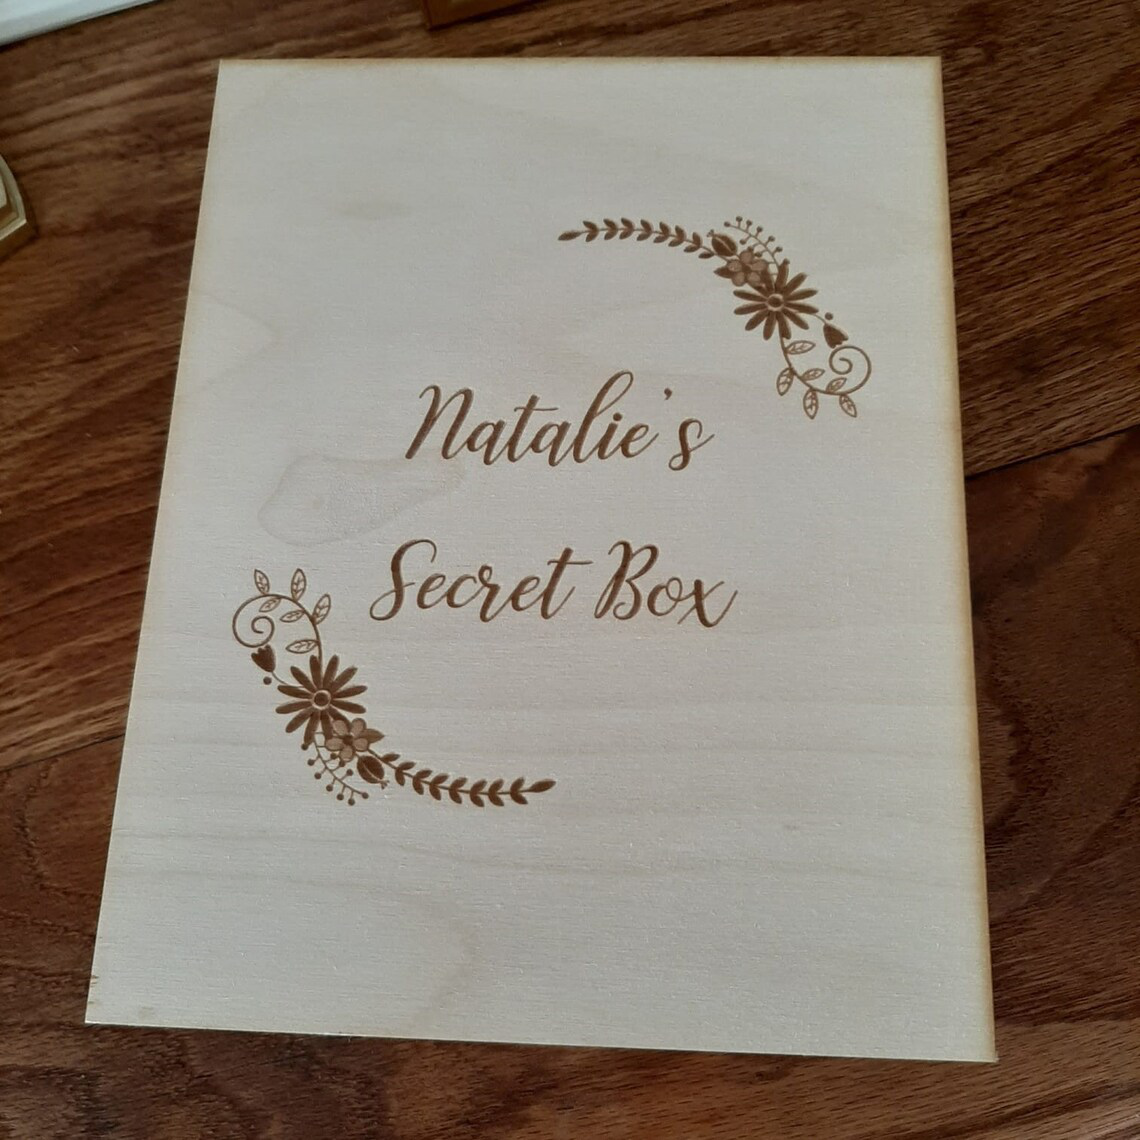 Personalized Wooden Book Shaped Box - Top View